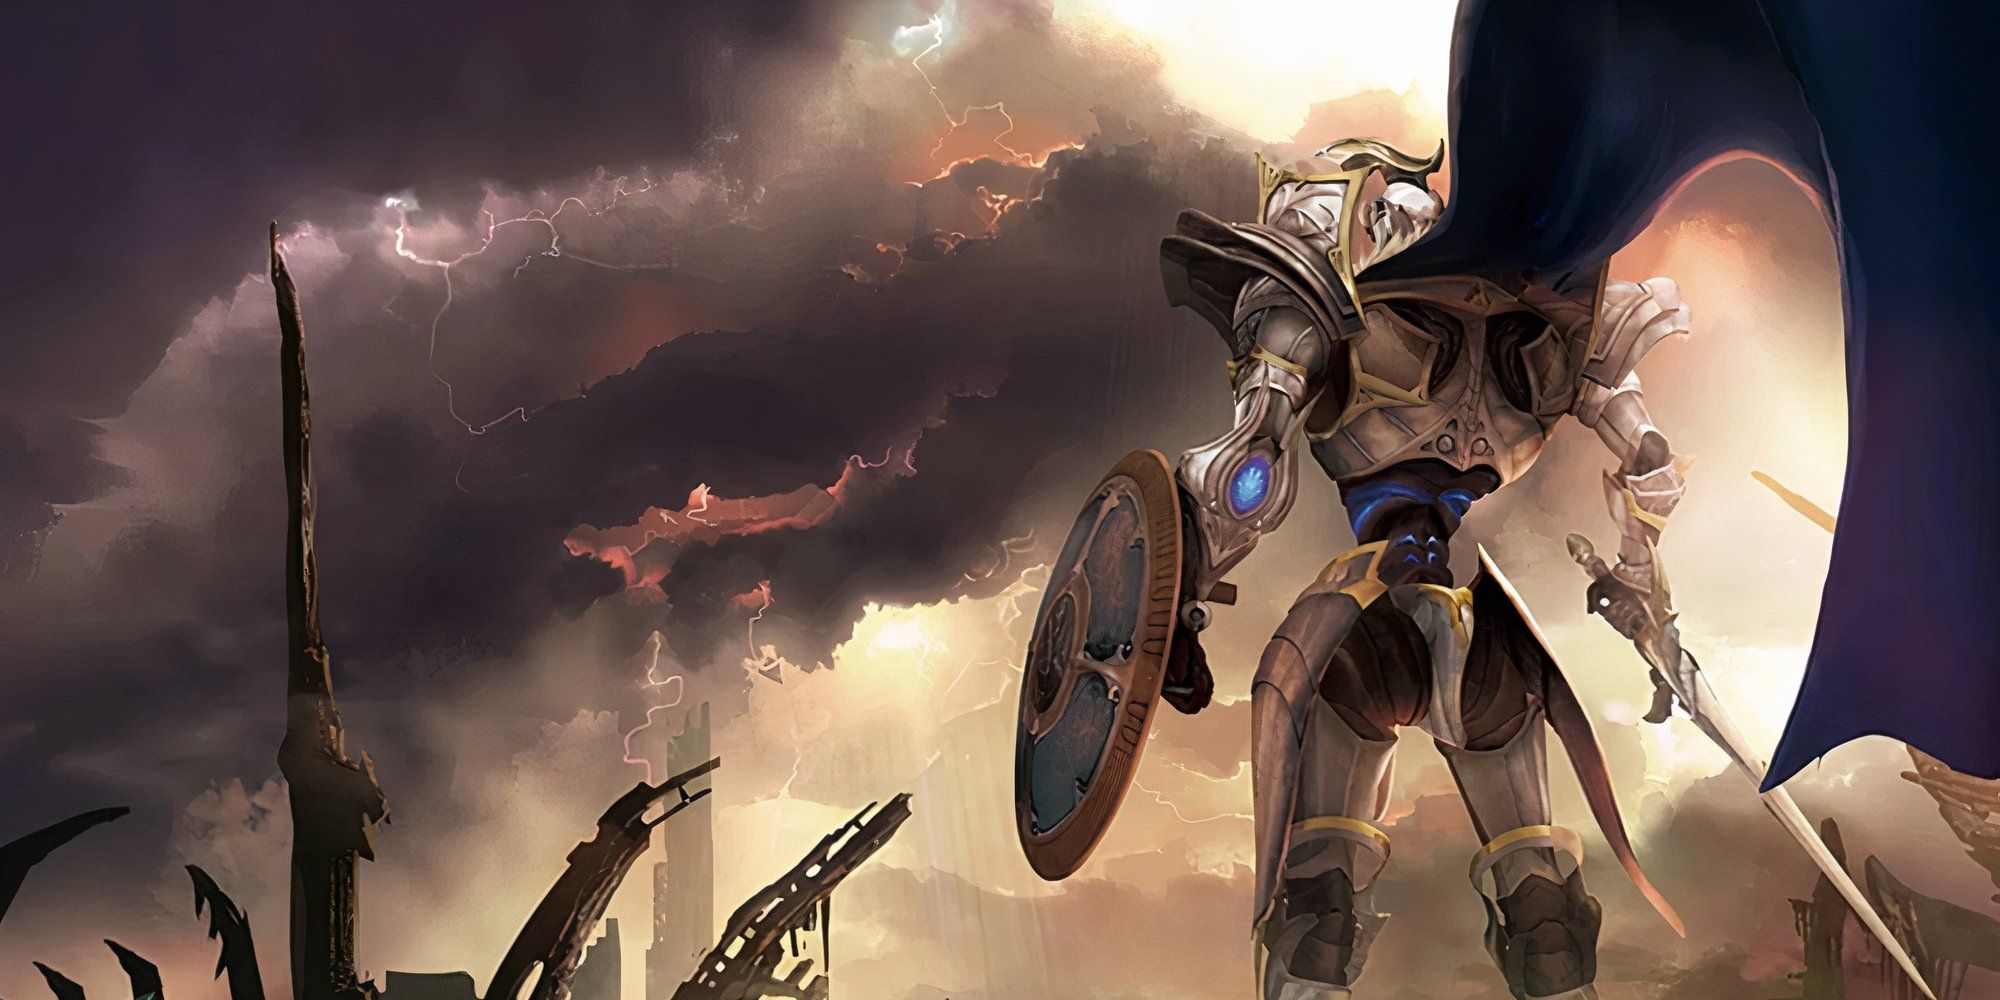 Promo art featuring the White Knight in White Knight Chronicles Origins